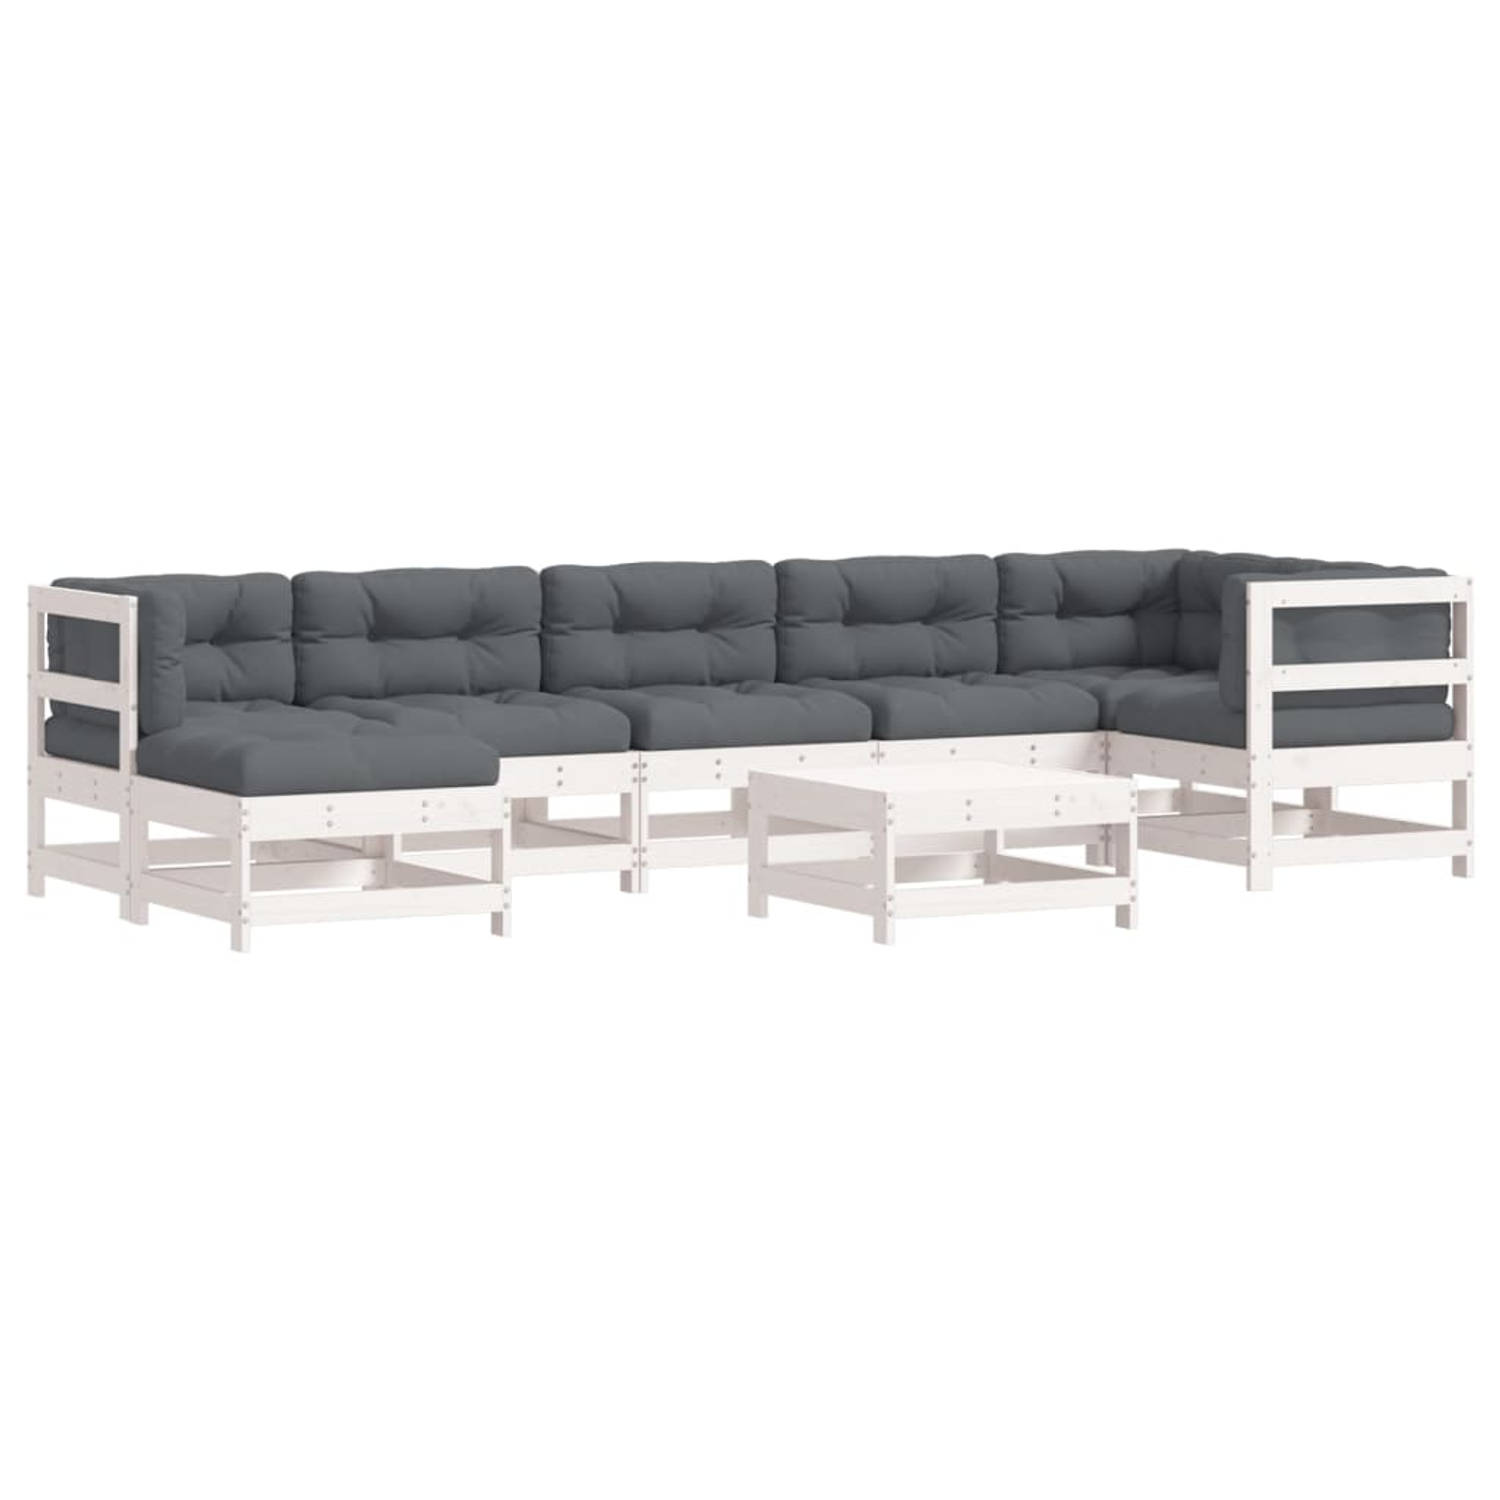 The Living Store Loungeset Massief Grenenhout - Modulair - Wit - 62x62x70.5 cm - Antraciet kussen